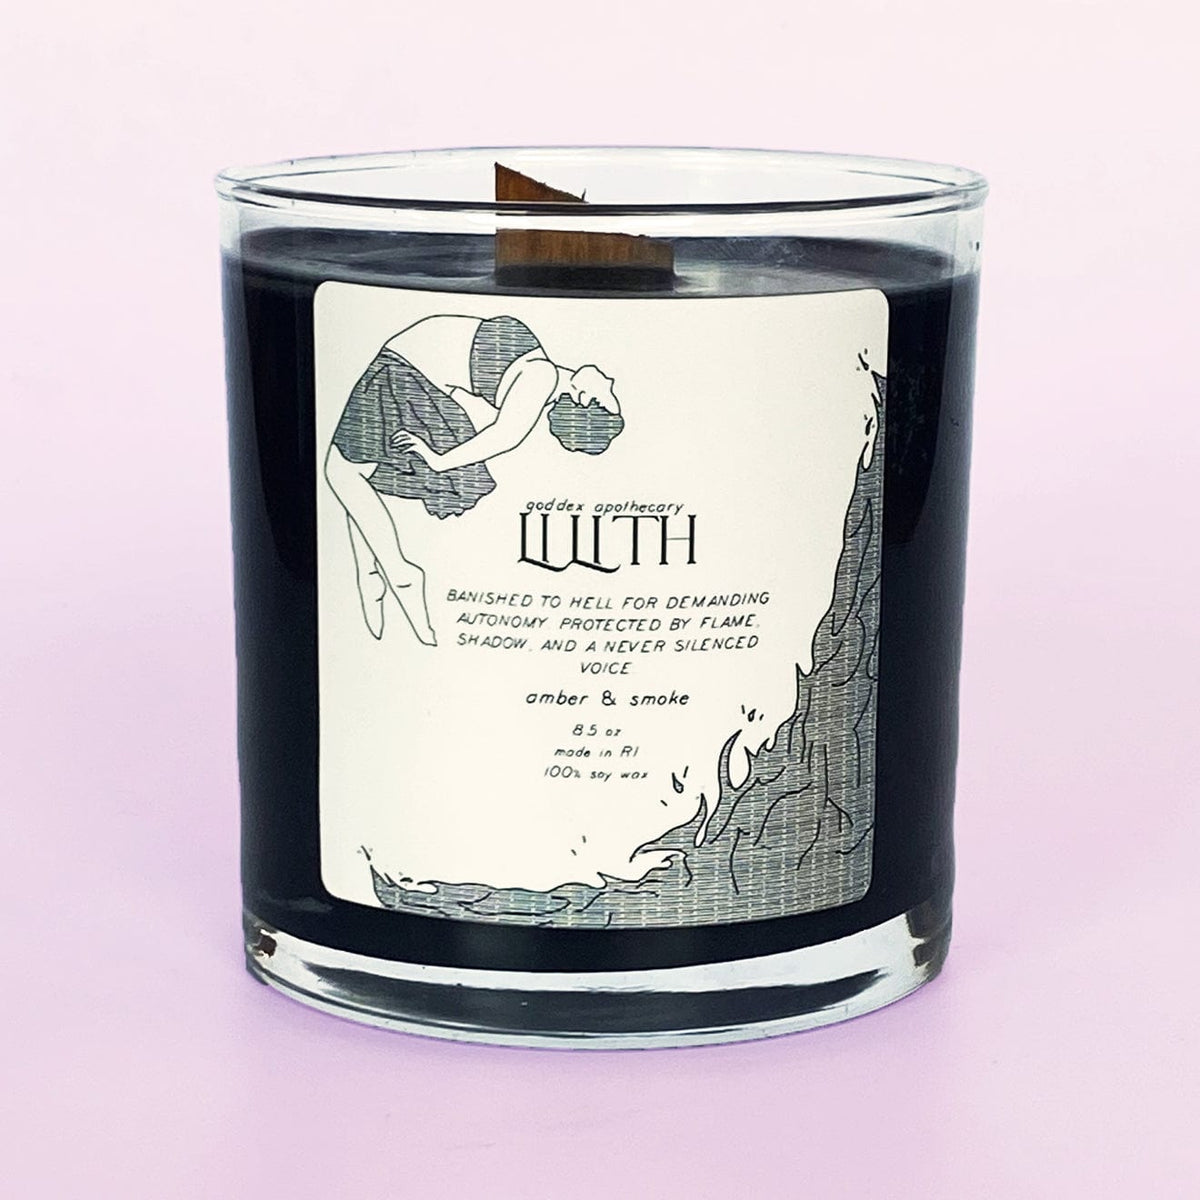 Goddex Apothecary Lilith Candle